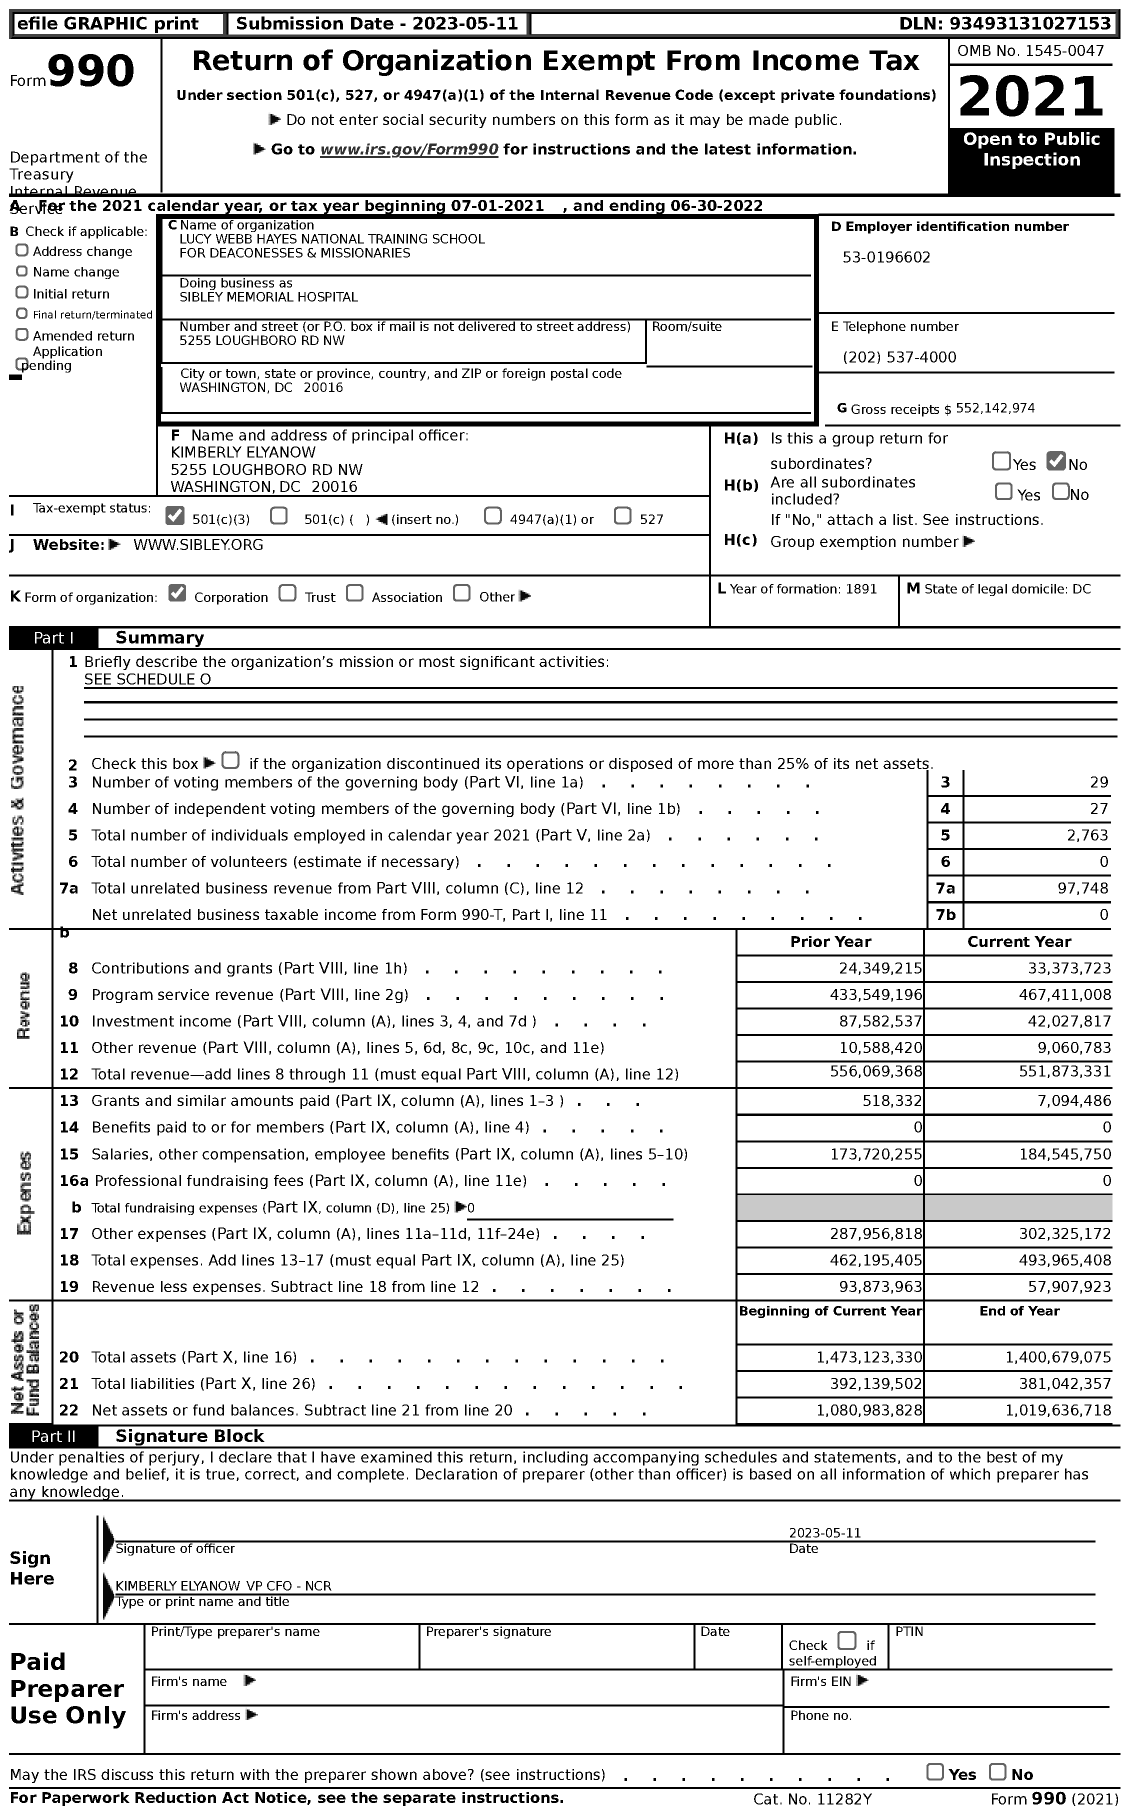 Image of first page of 2021 Form 990 for Sibley Memorial Hospital (SMH)